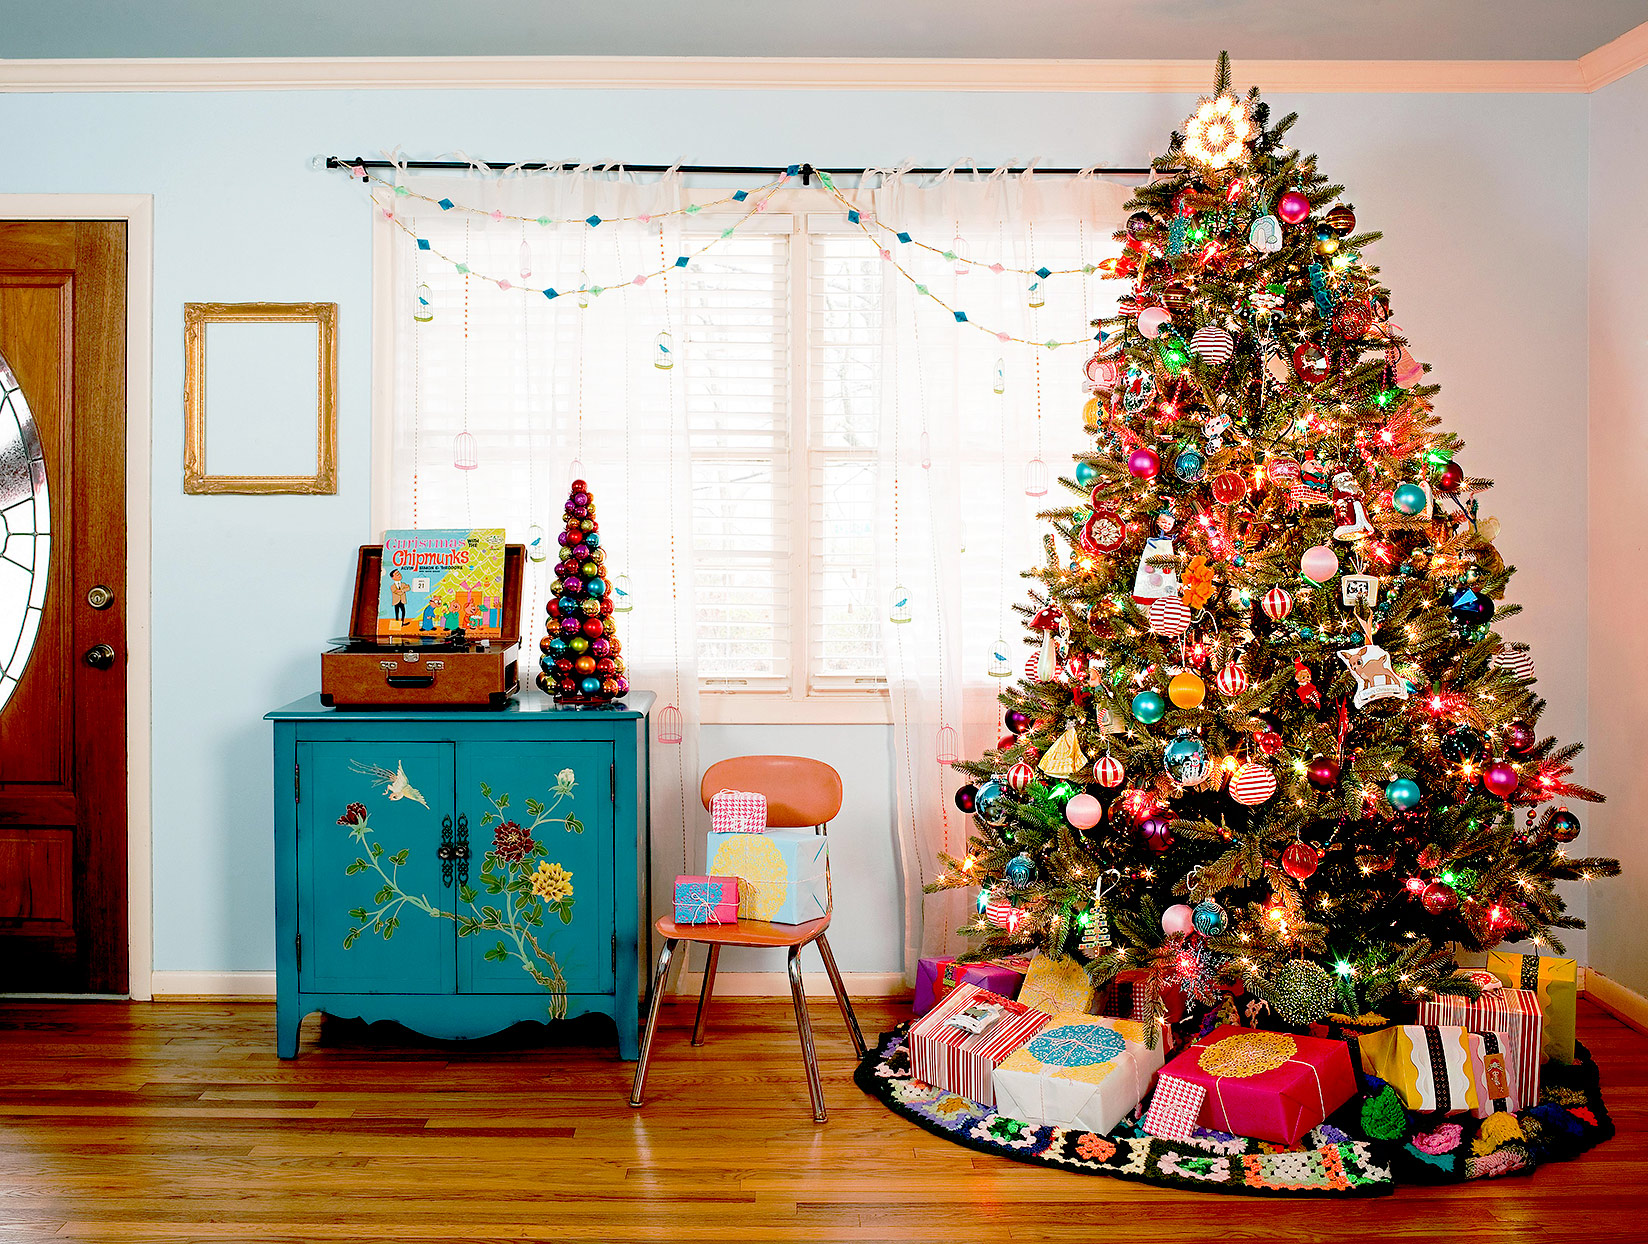 squarerooms jeff herr photography christmas tree living room decor colourful eclectic festive